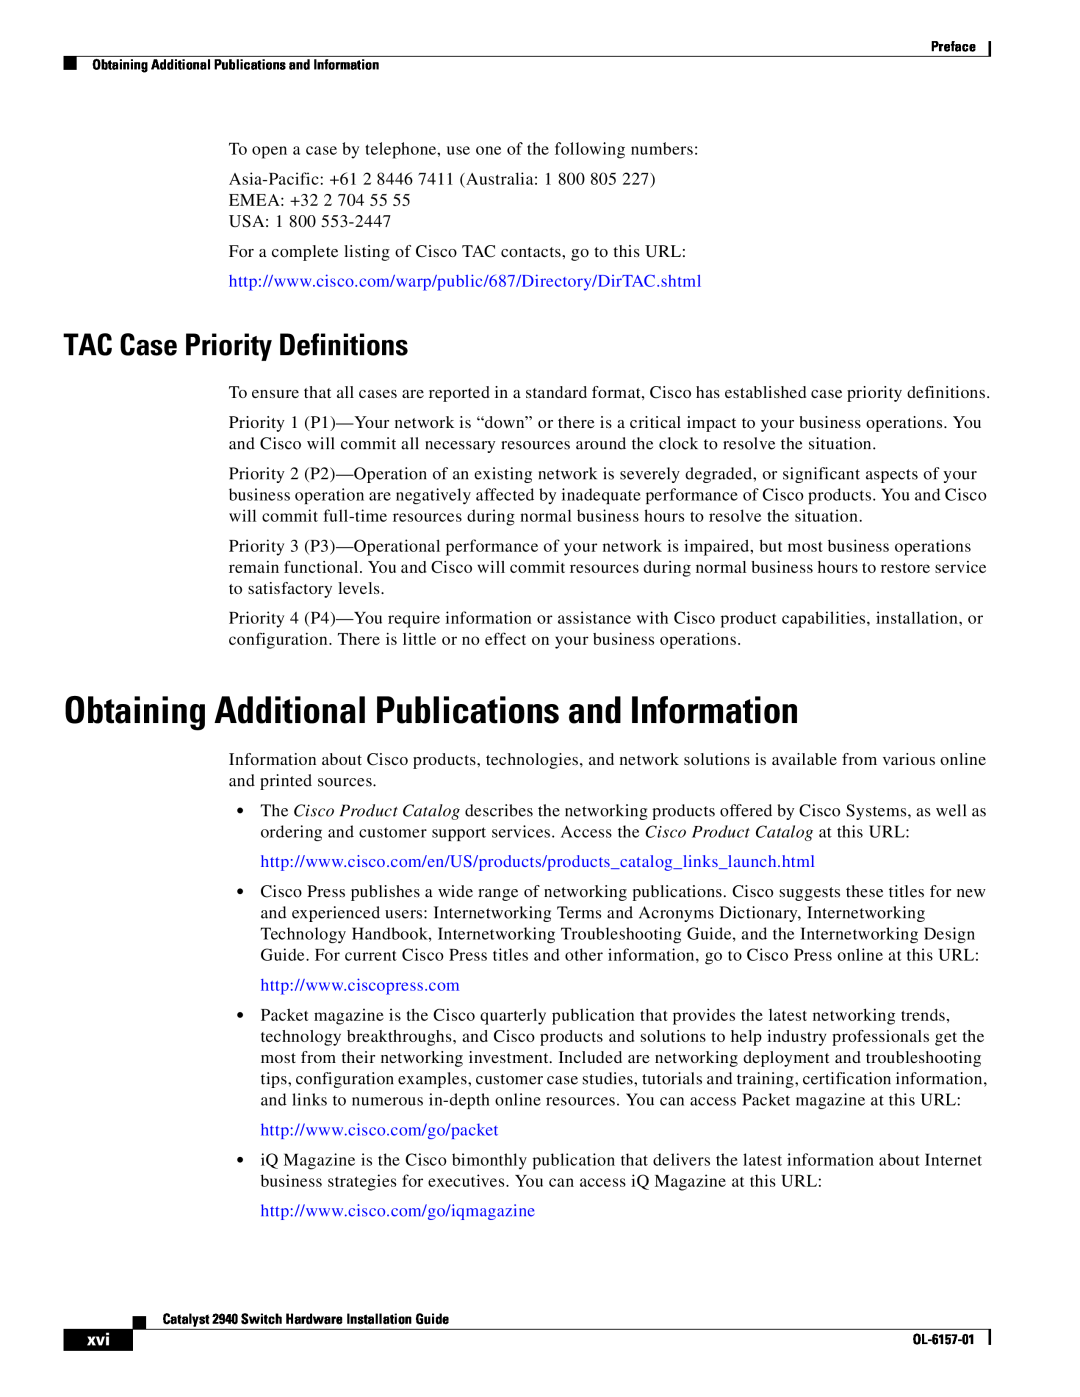 Cisco Systems OL-6157-01 manual Obtaining Additional Publications and Information, TAC Case Priority Definitions 